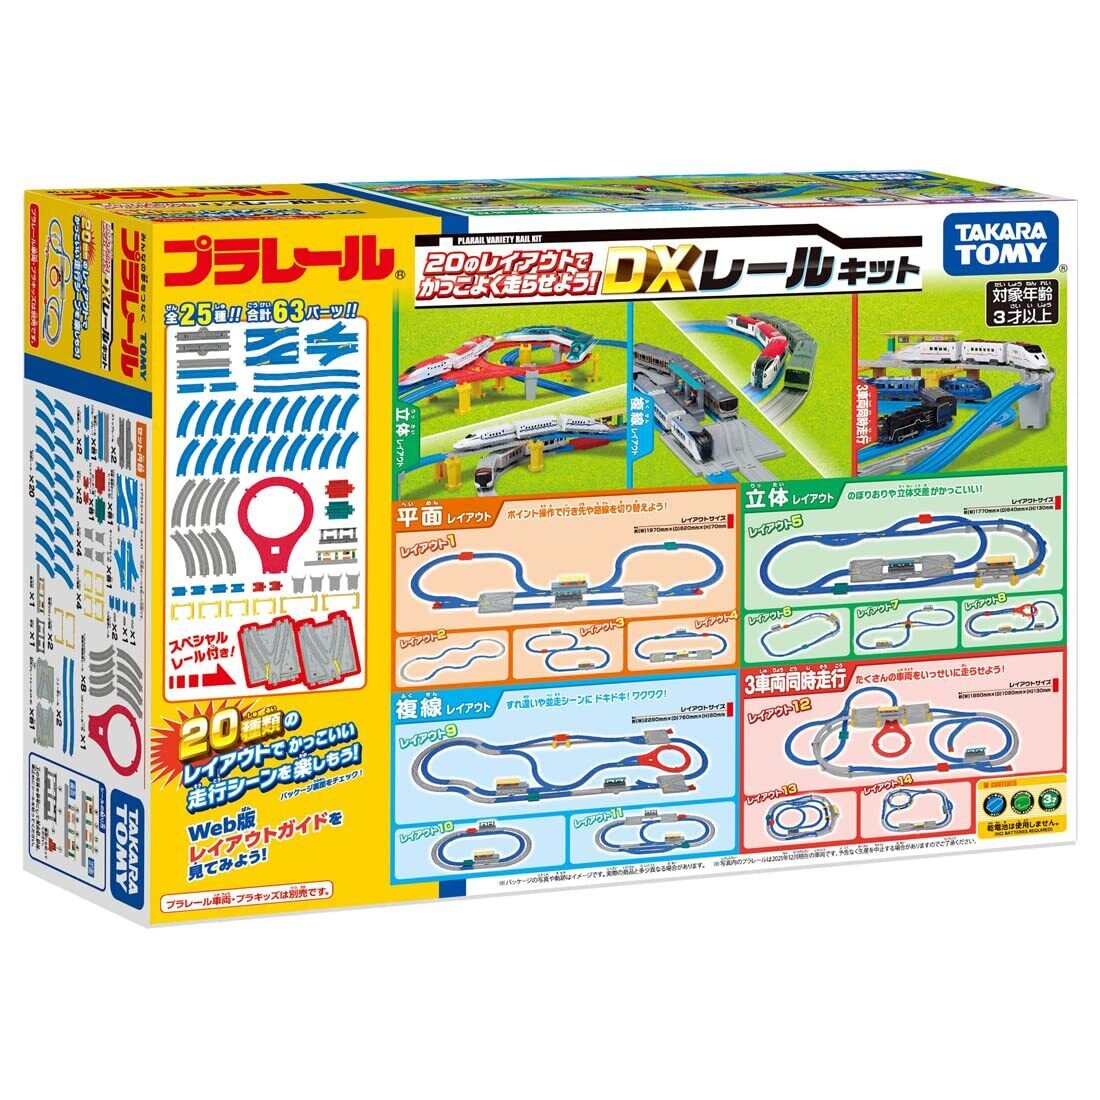 Takara Tomy Let\'s Run Cool With The Layout Of Takara Tomy Plarail 20 DX